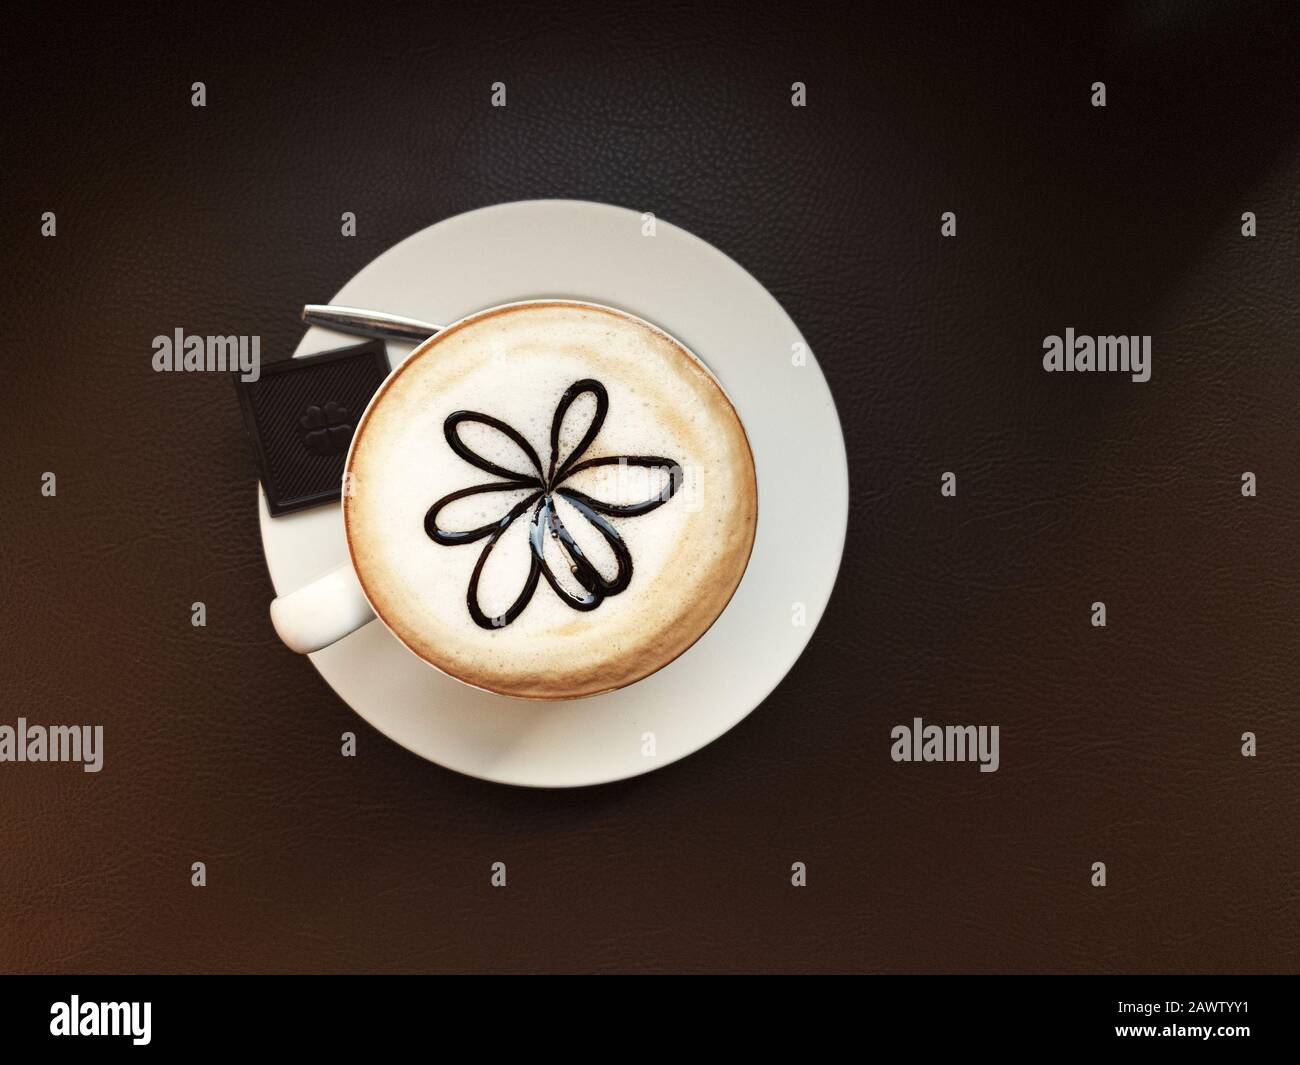 A cup coffee with flower shape in a cafe Stock Photo